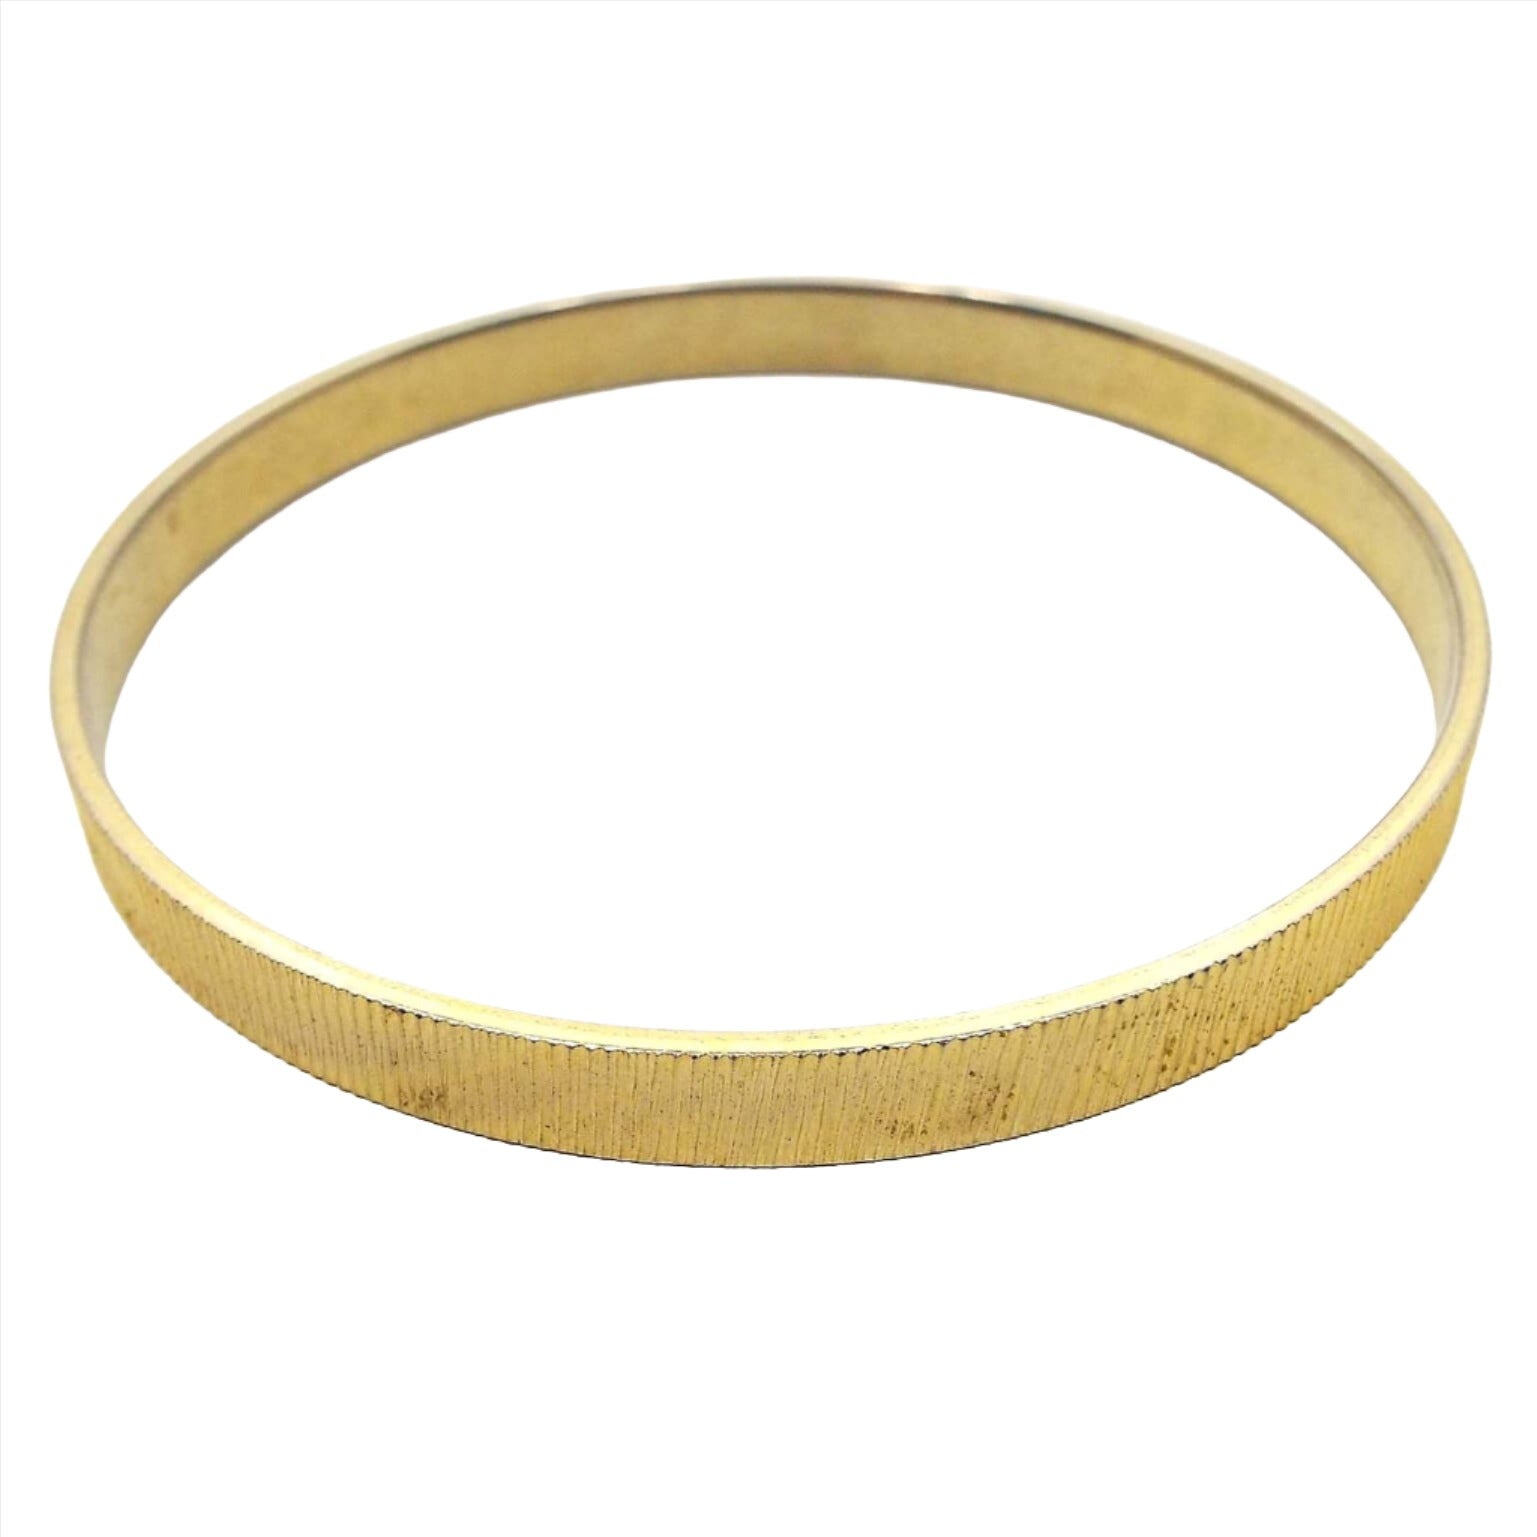 Angled front view of the retro vintage bangle bracelet. It is gold tone in color and is textured with small etched lines all the way around.